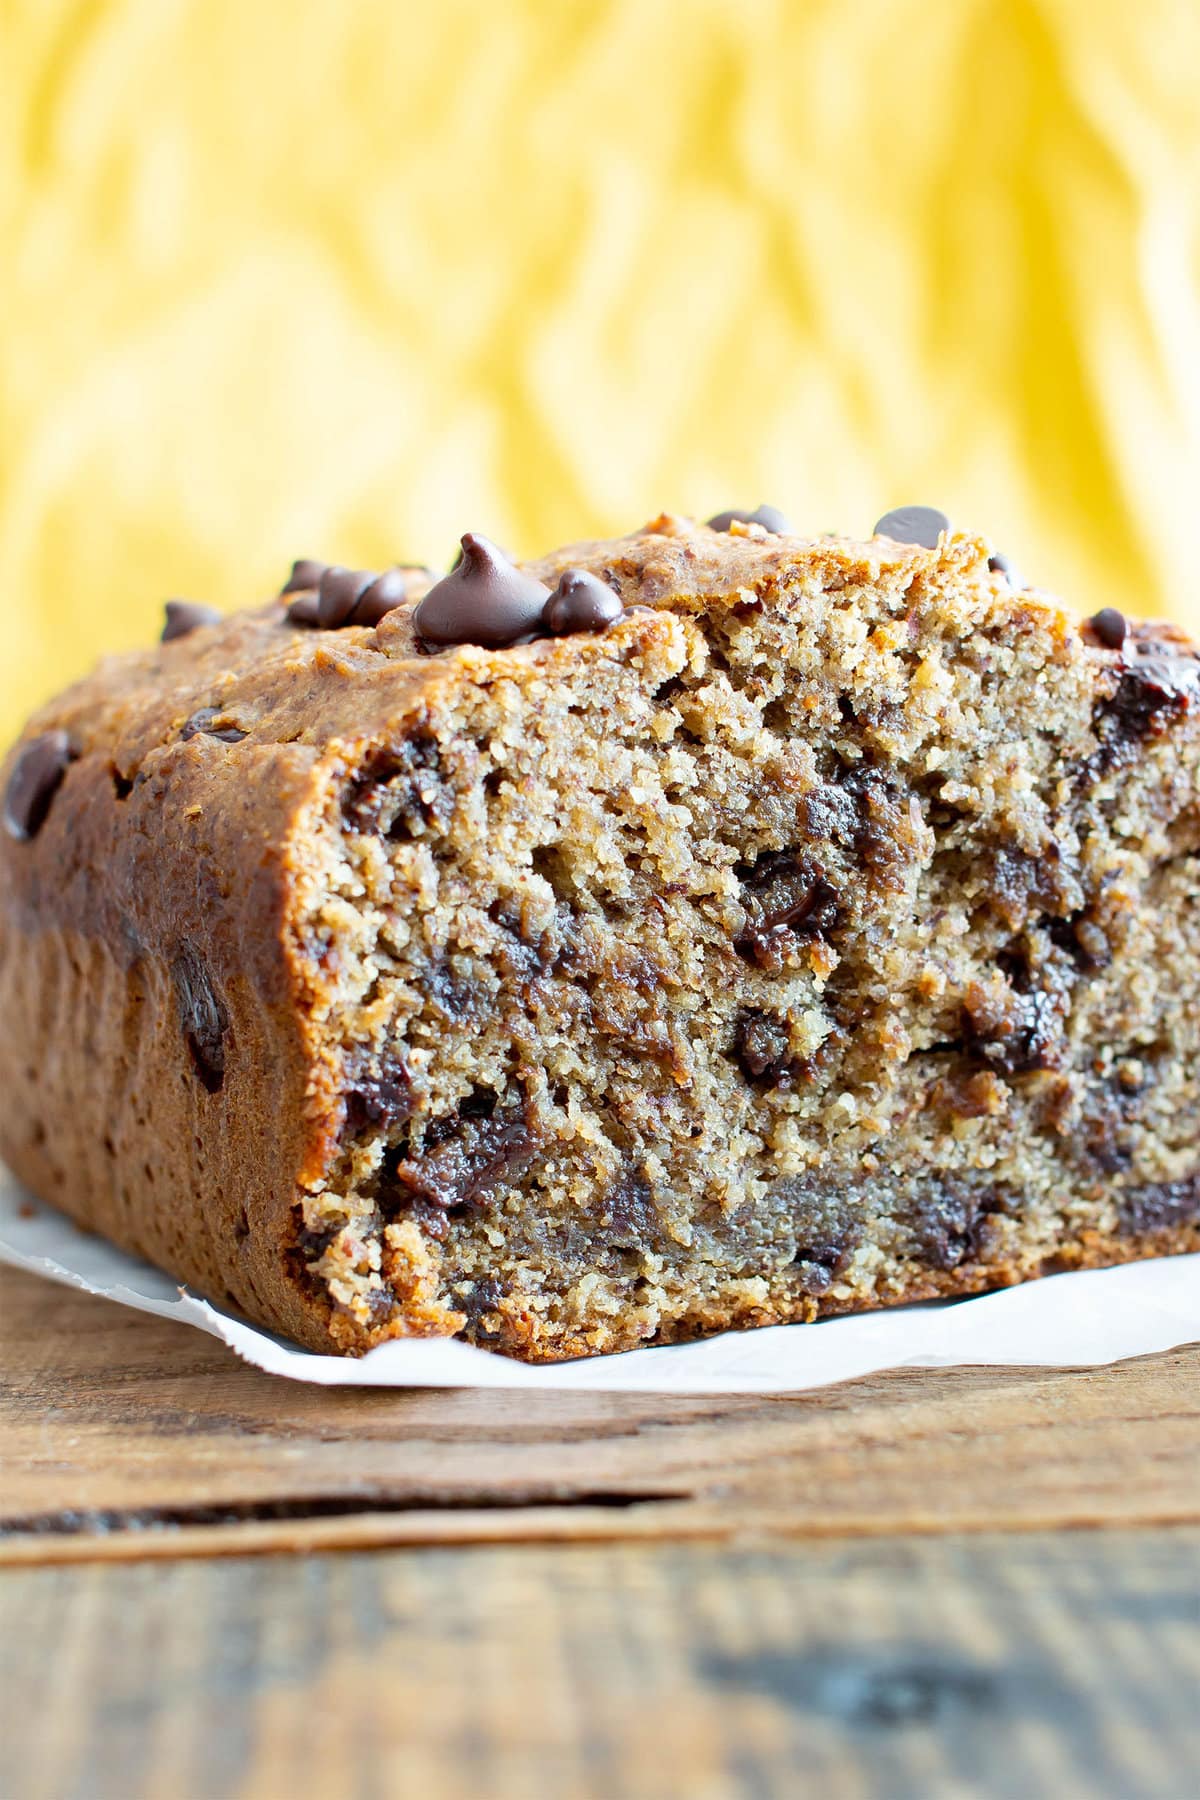 Sliced loaf of moist banana bread - one of the Banana Breakfast Recipes in today's recipe collection